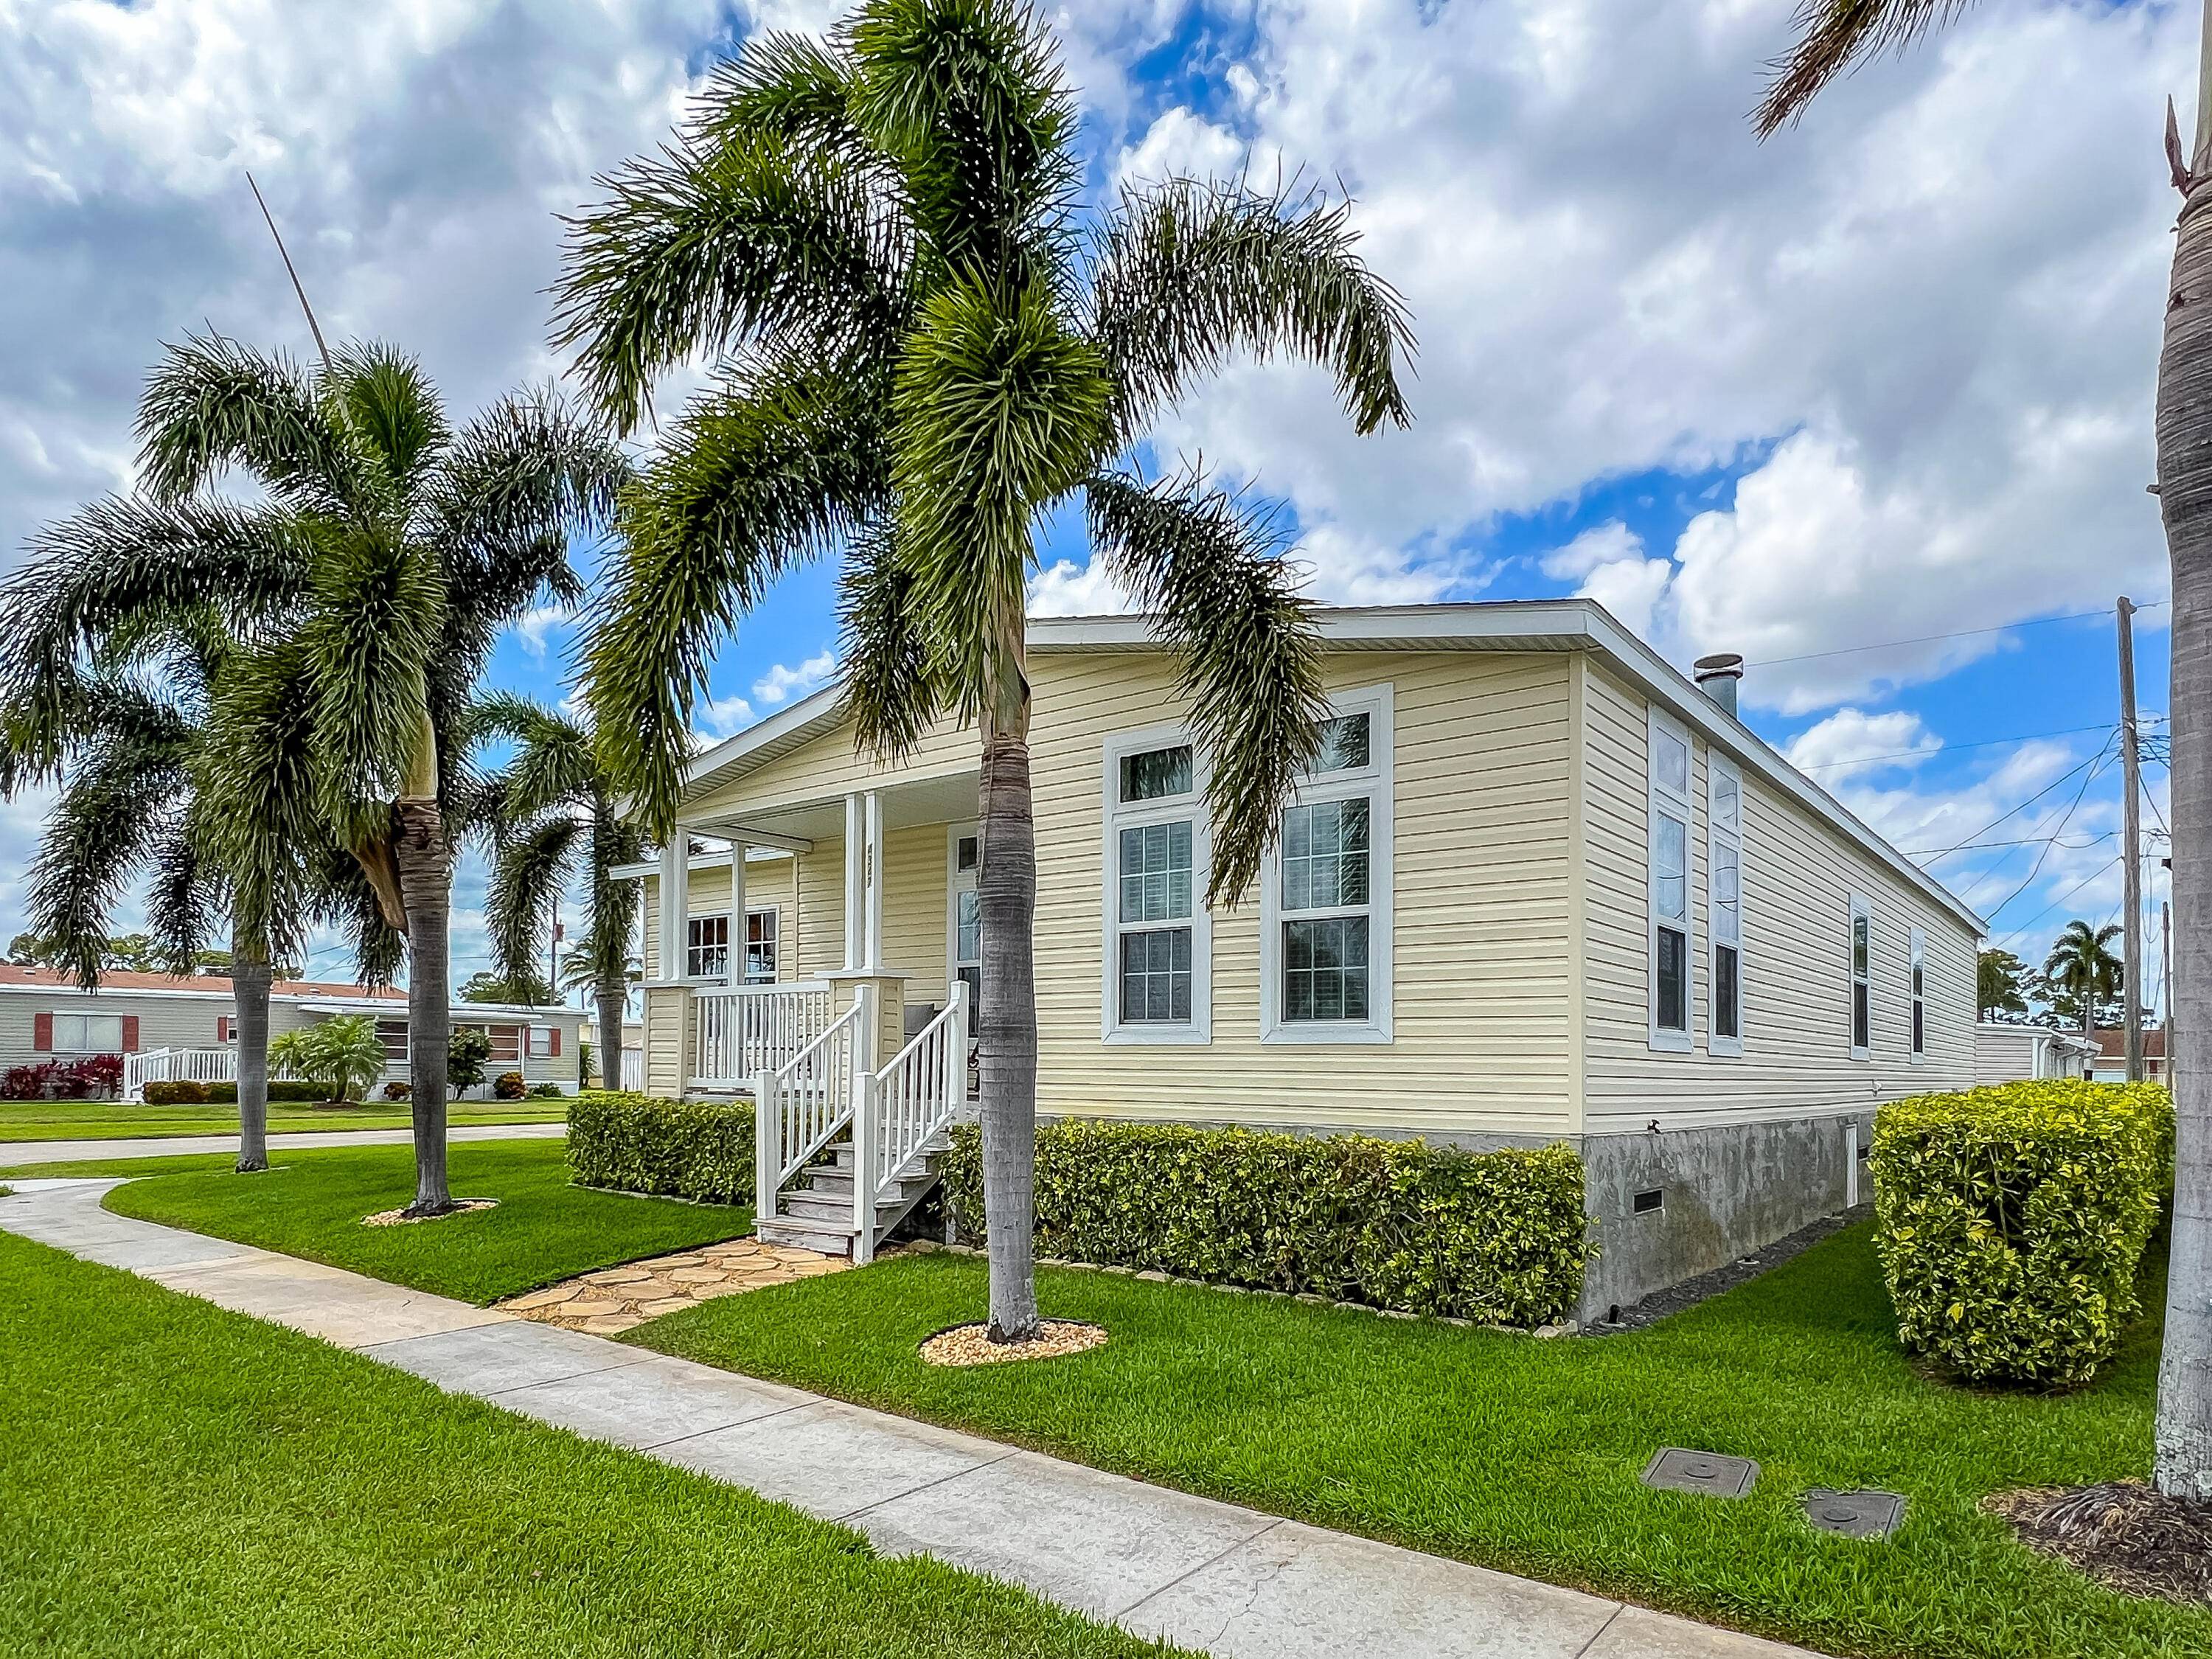 Beautiful and luxurious manufactured home in the heart of Boynton Beach.